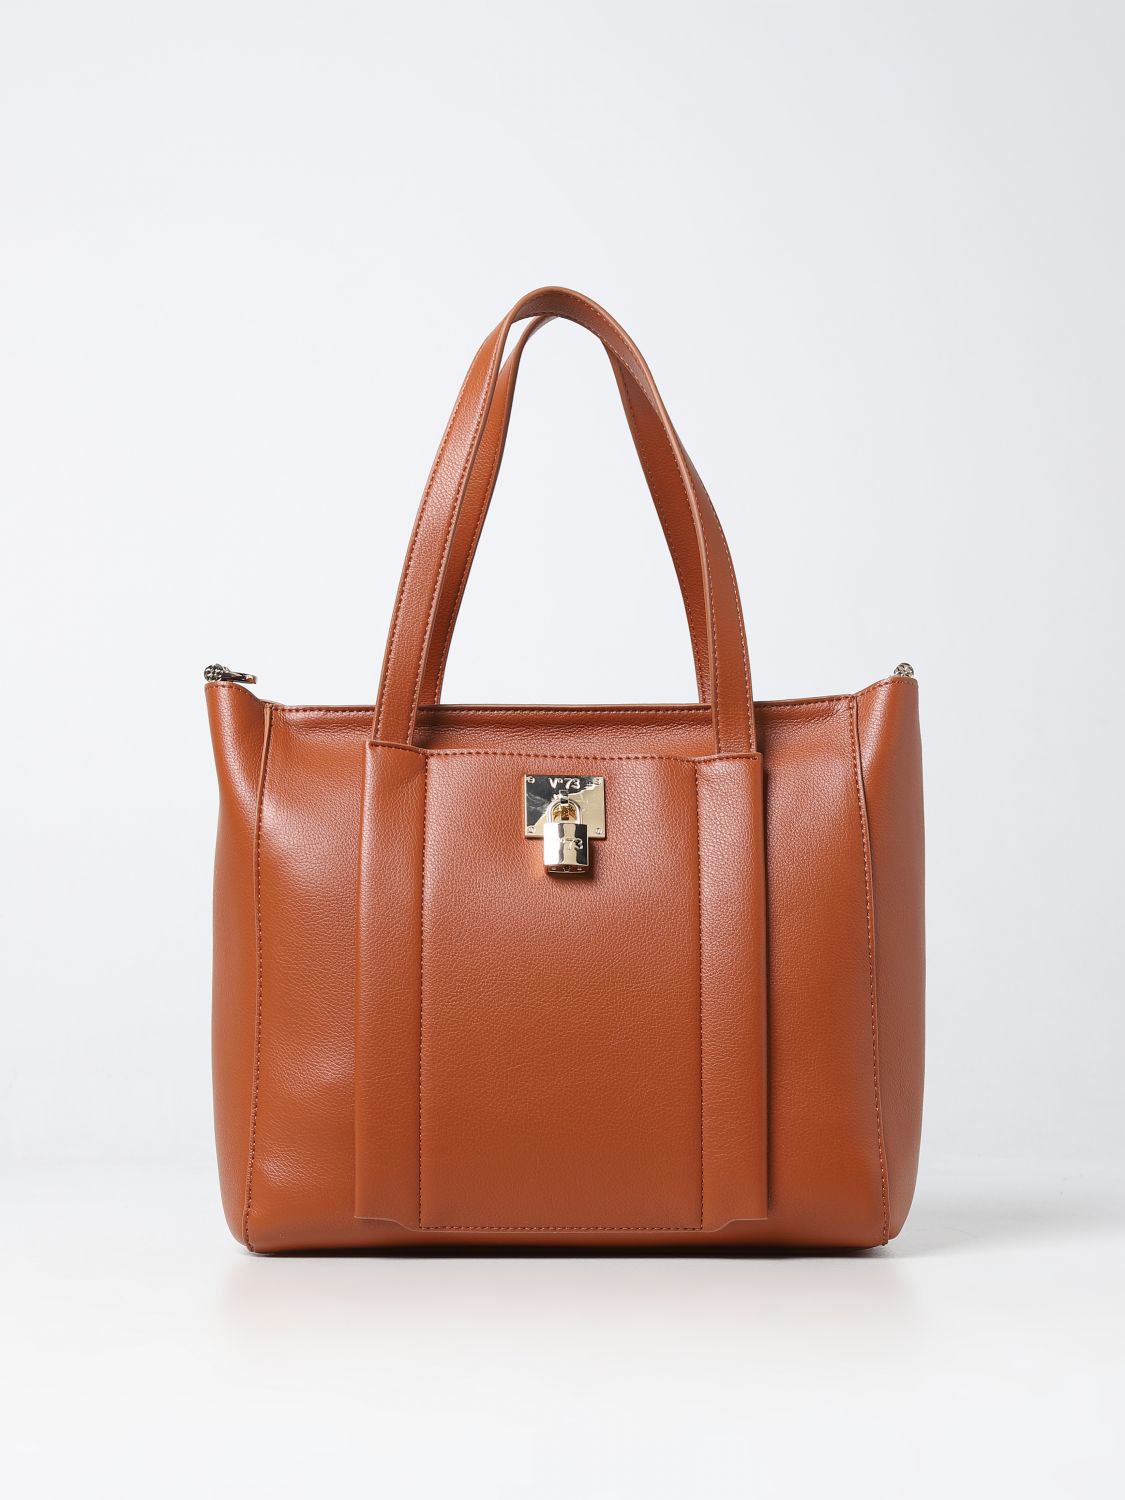 V73 TOTE BAGS V73 WOMAN COLOR LEATHER,386326107